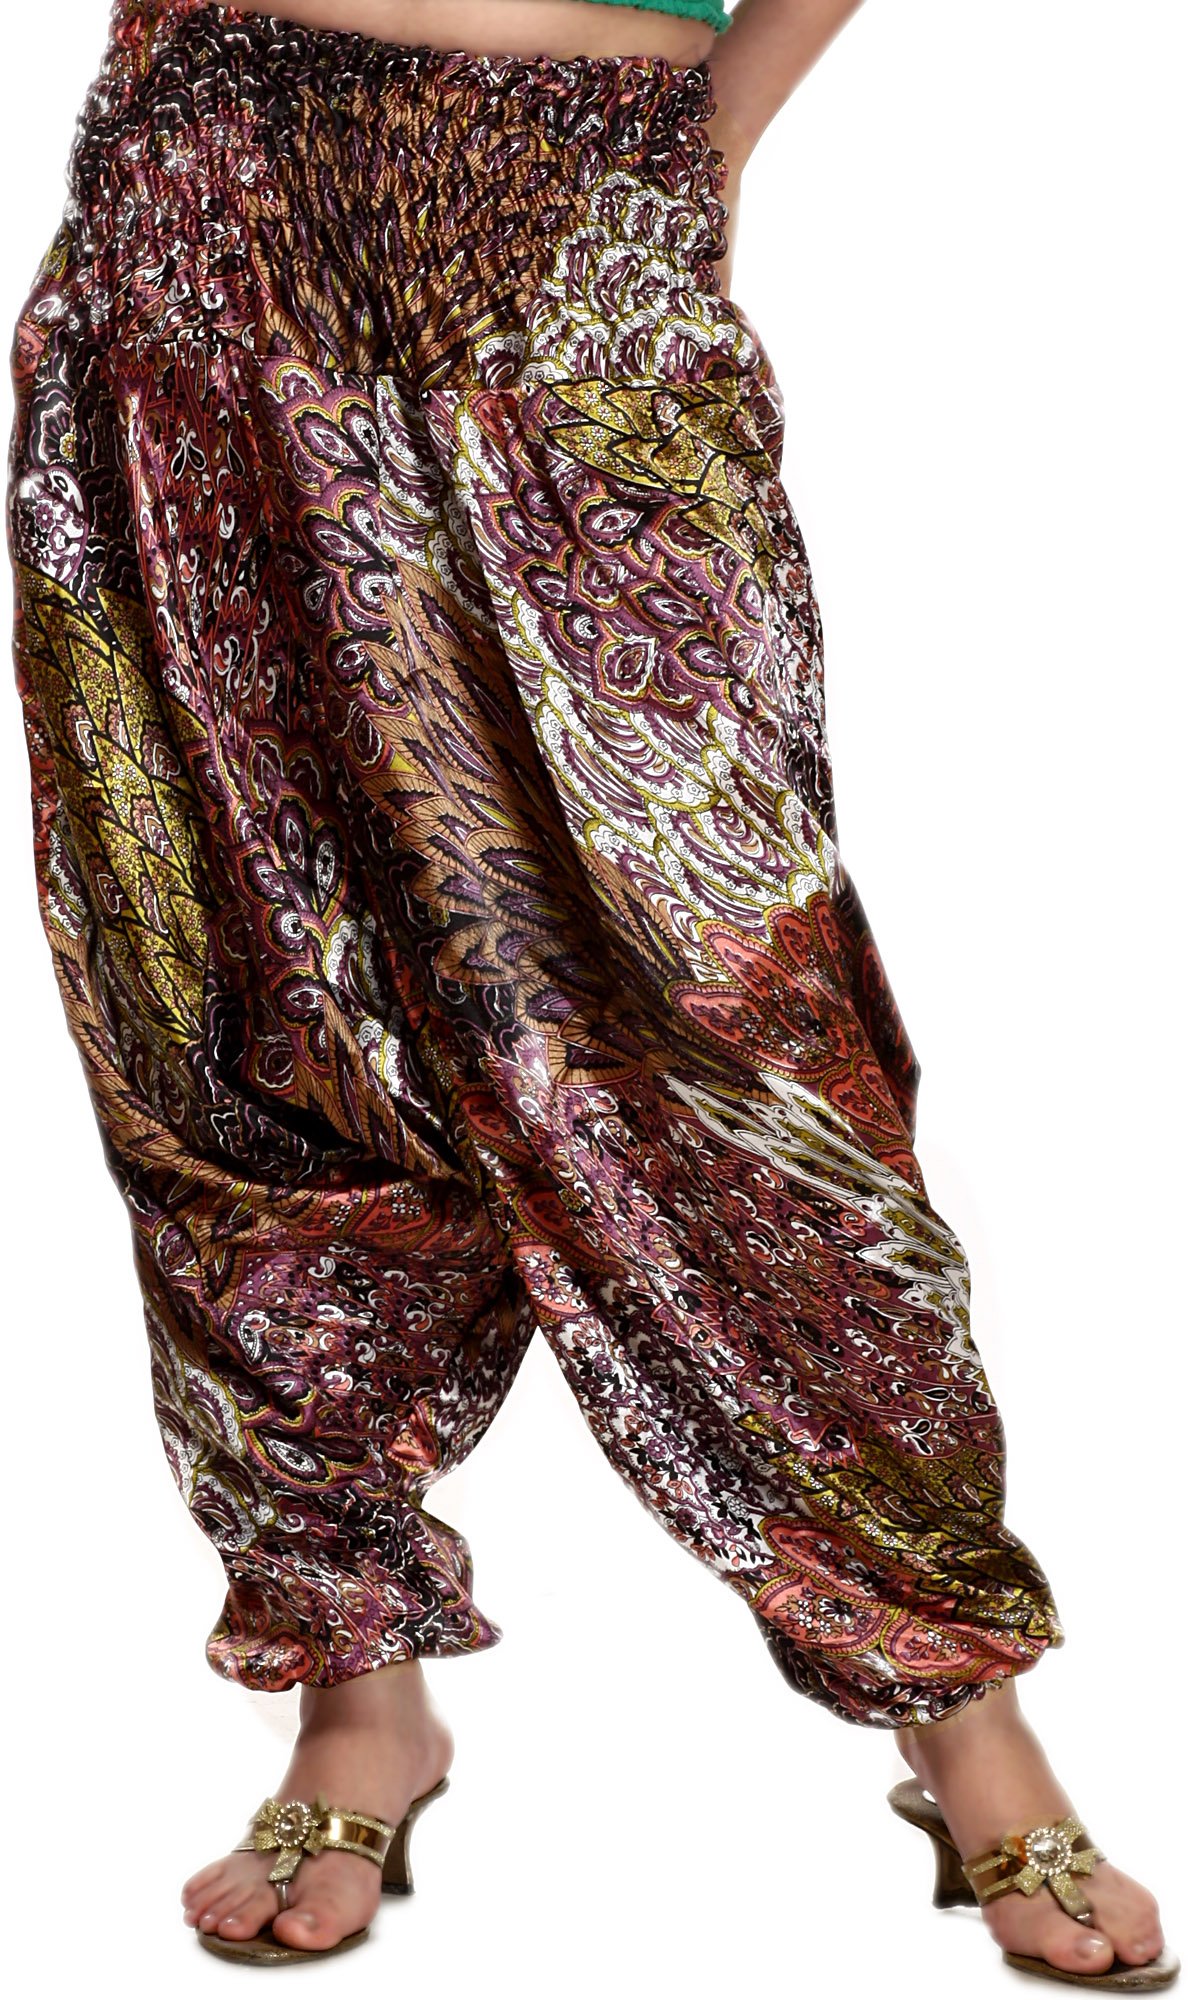 Maroon Solid Color Dhoti Harem Pants for Girls  Women  Zubix  Clothing  Accessories and Home Furnishing Shop Online